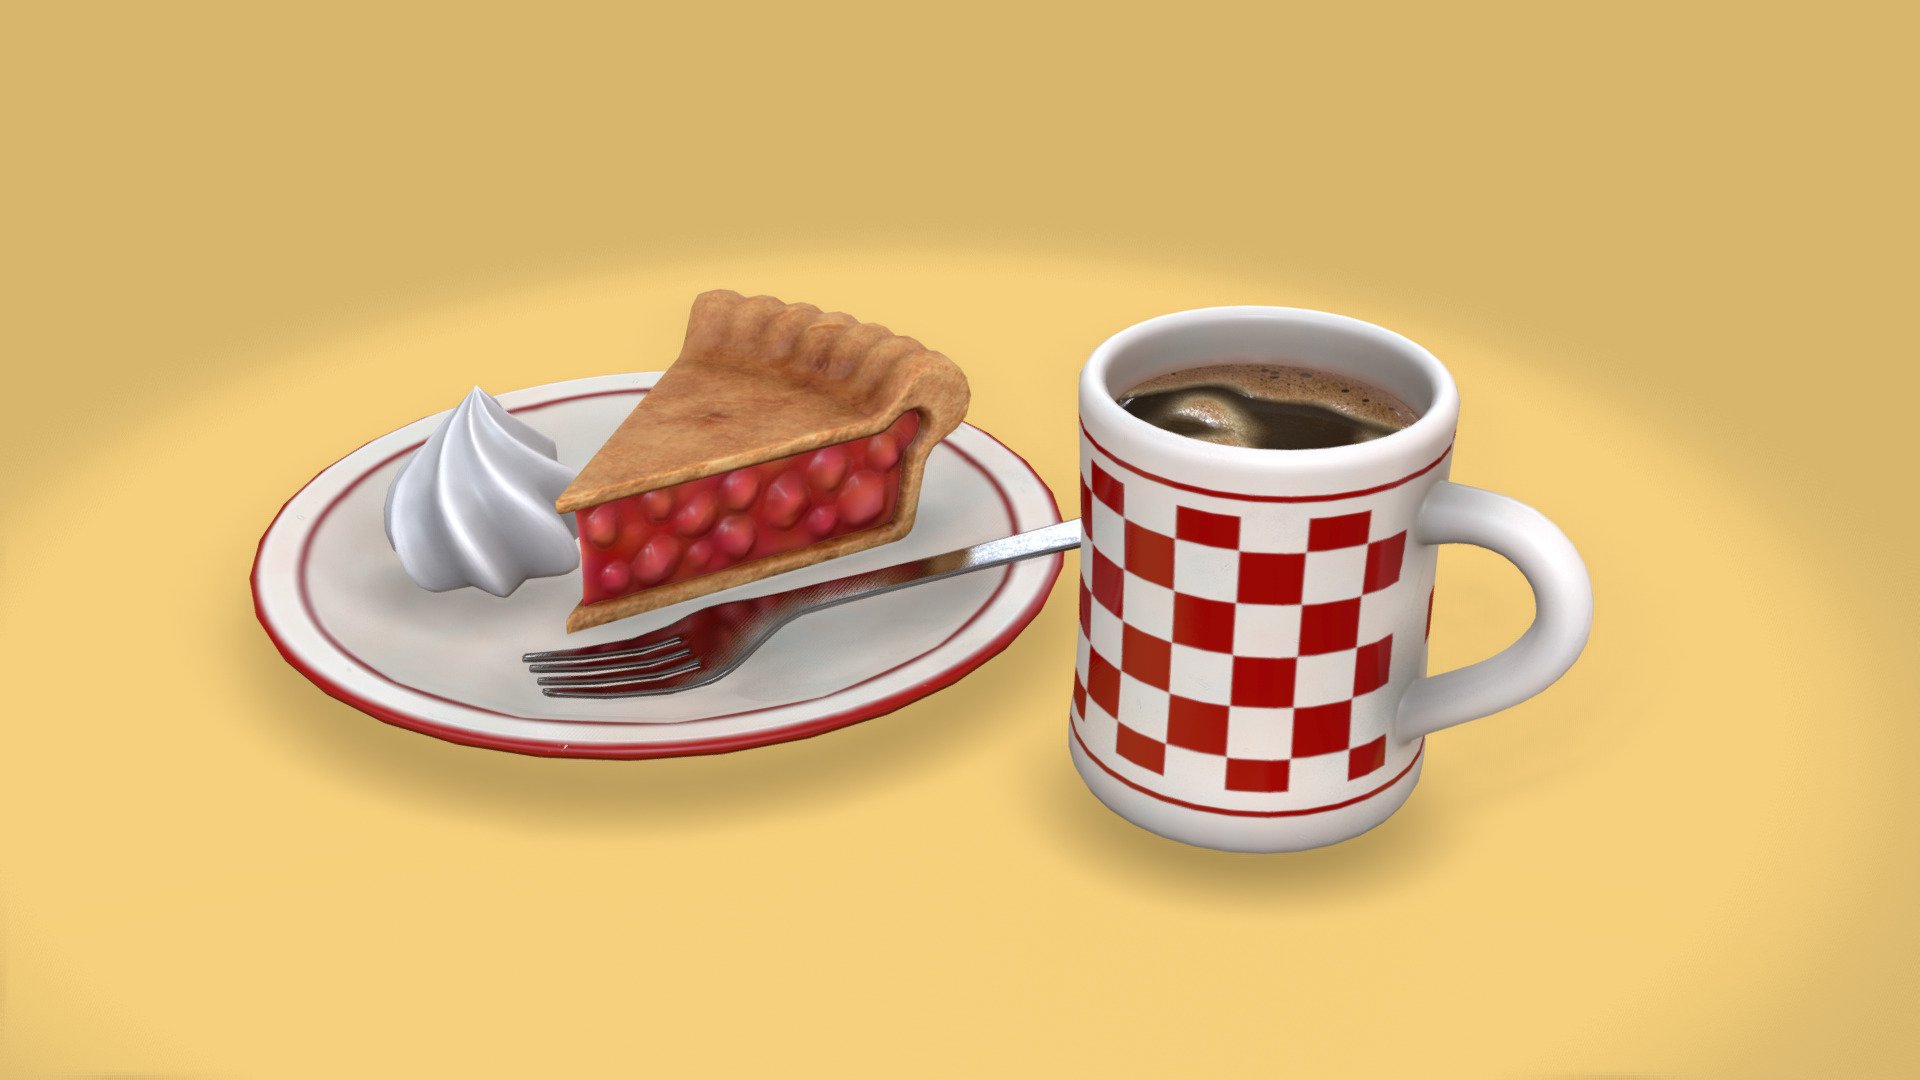 My entry for the Sketchfab Weekly Challenge for 11/14 &ldquo;Coffee